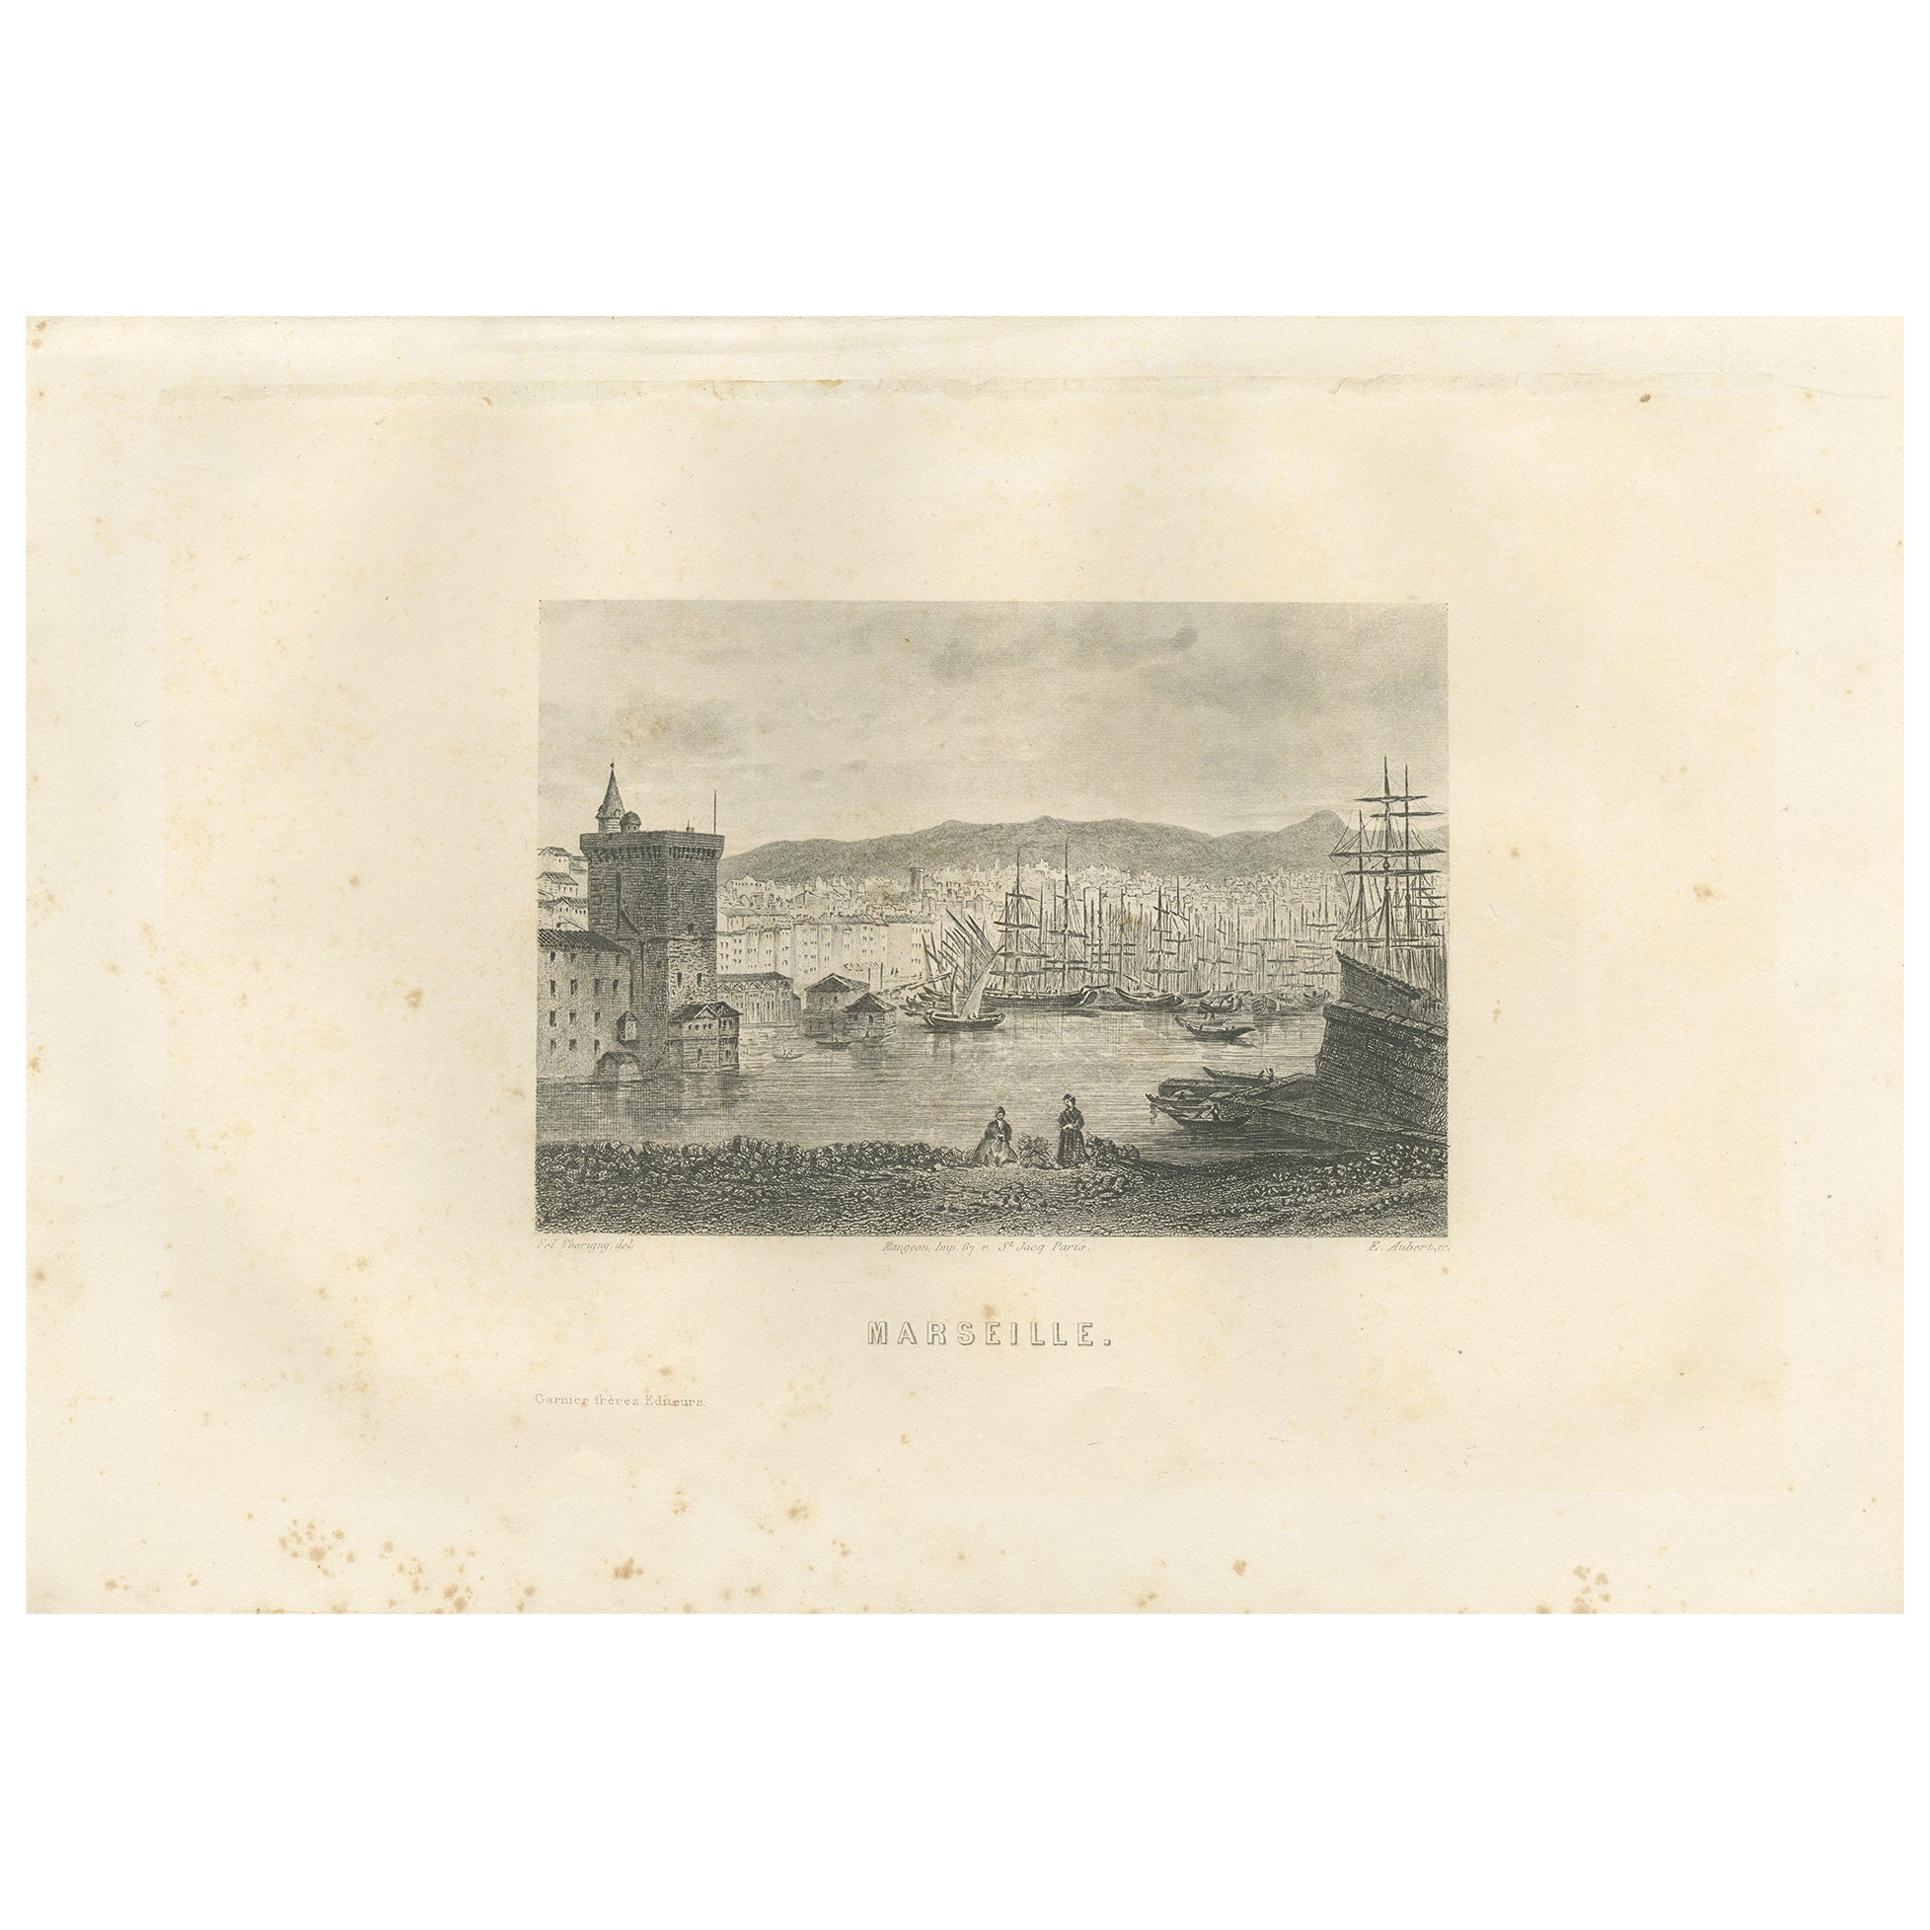 Antique Print of the City of Marseille by Grégoire, '1883'